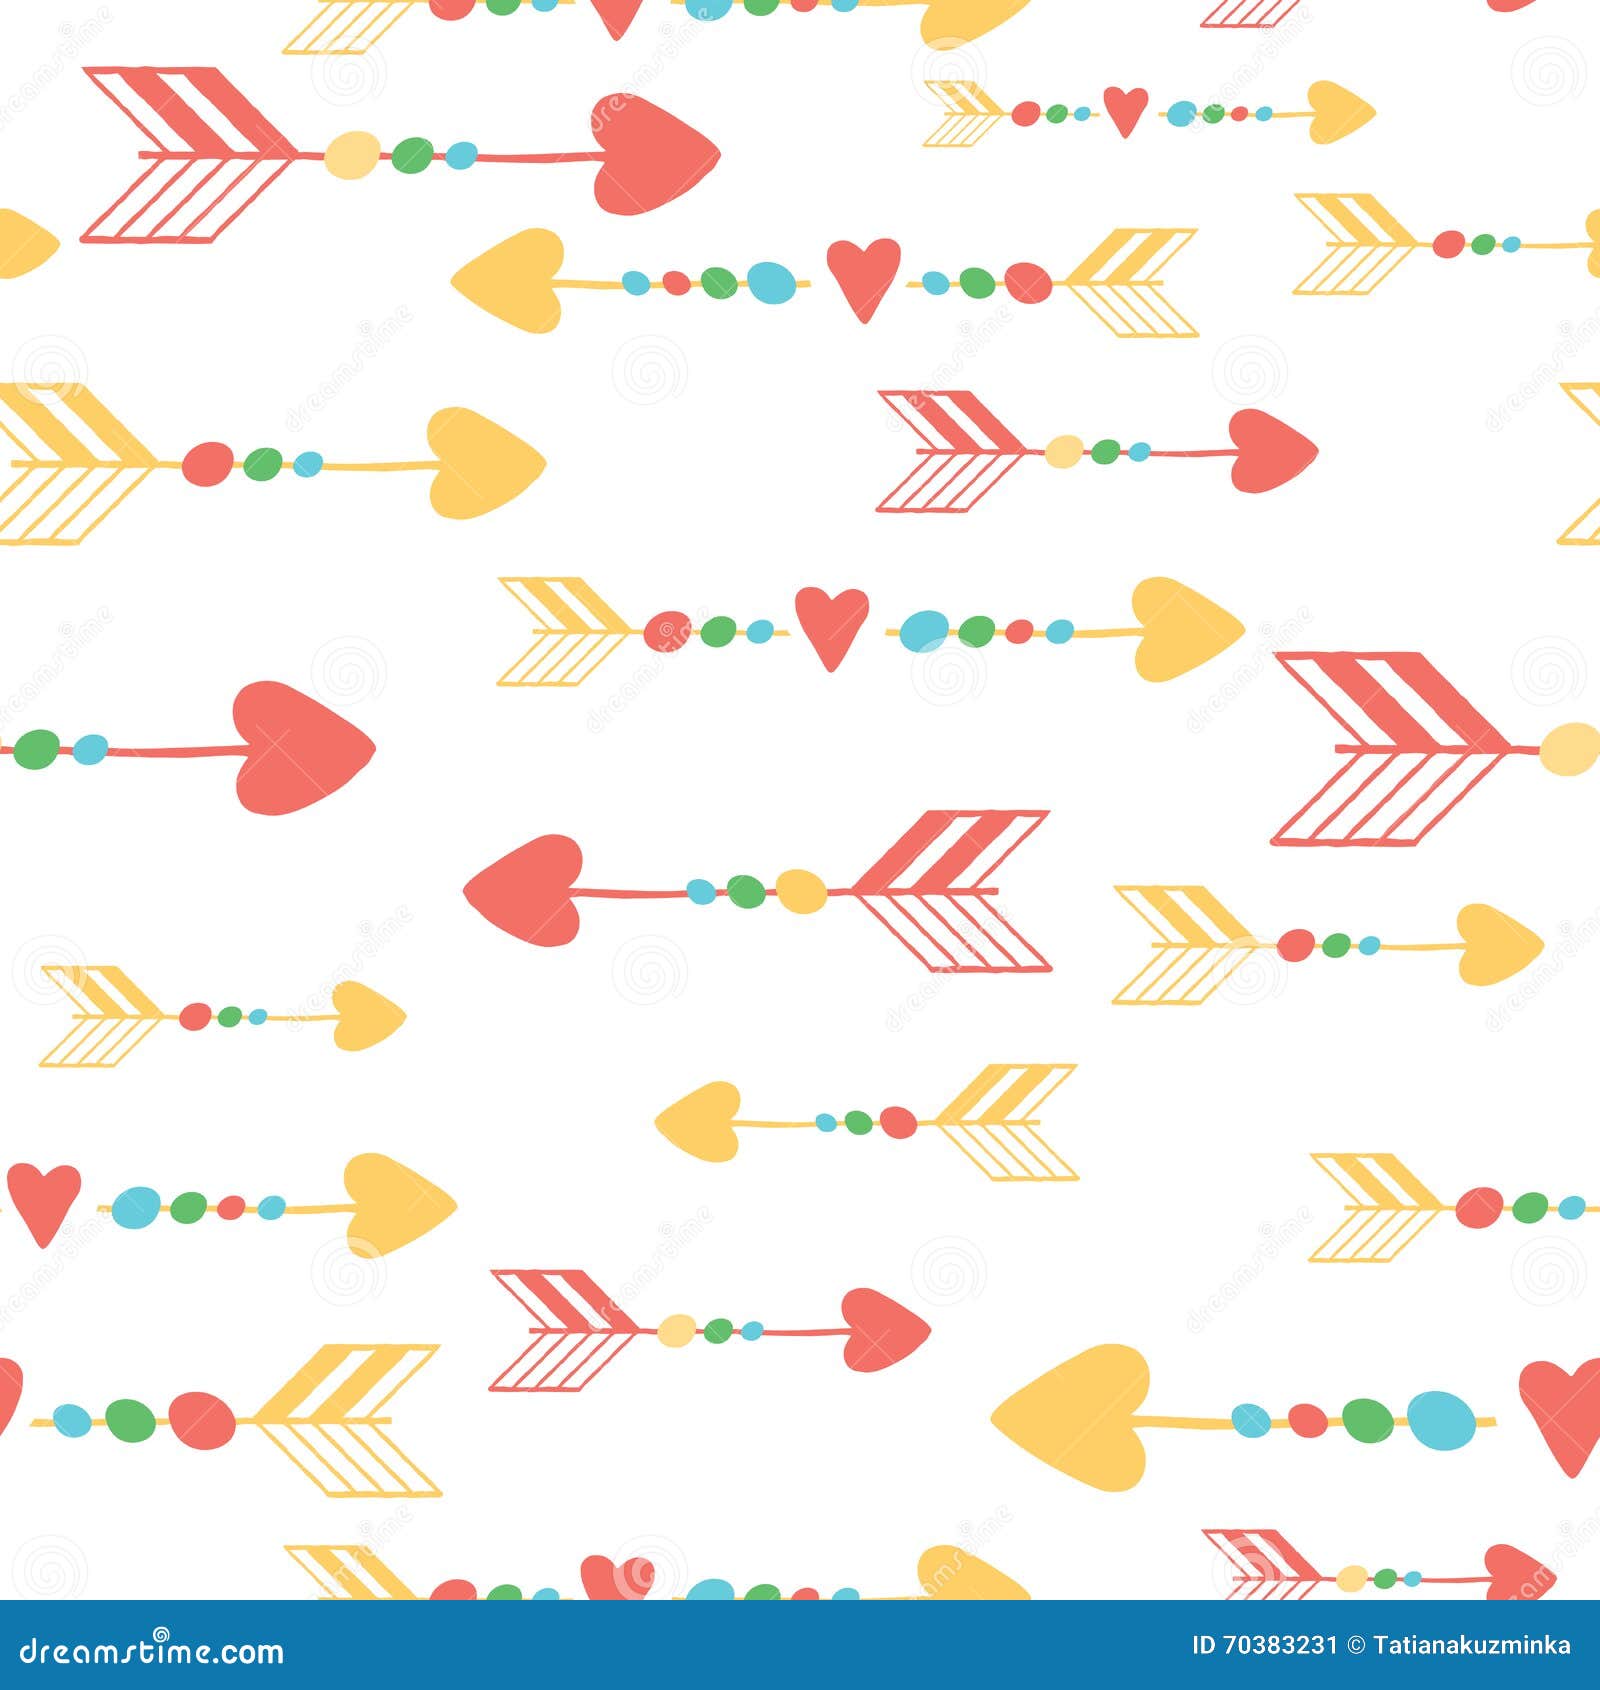 yellow themes tumblr Kids Colorful Pattern Arrows. Seamless Summer With